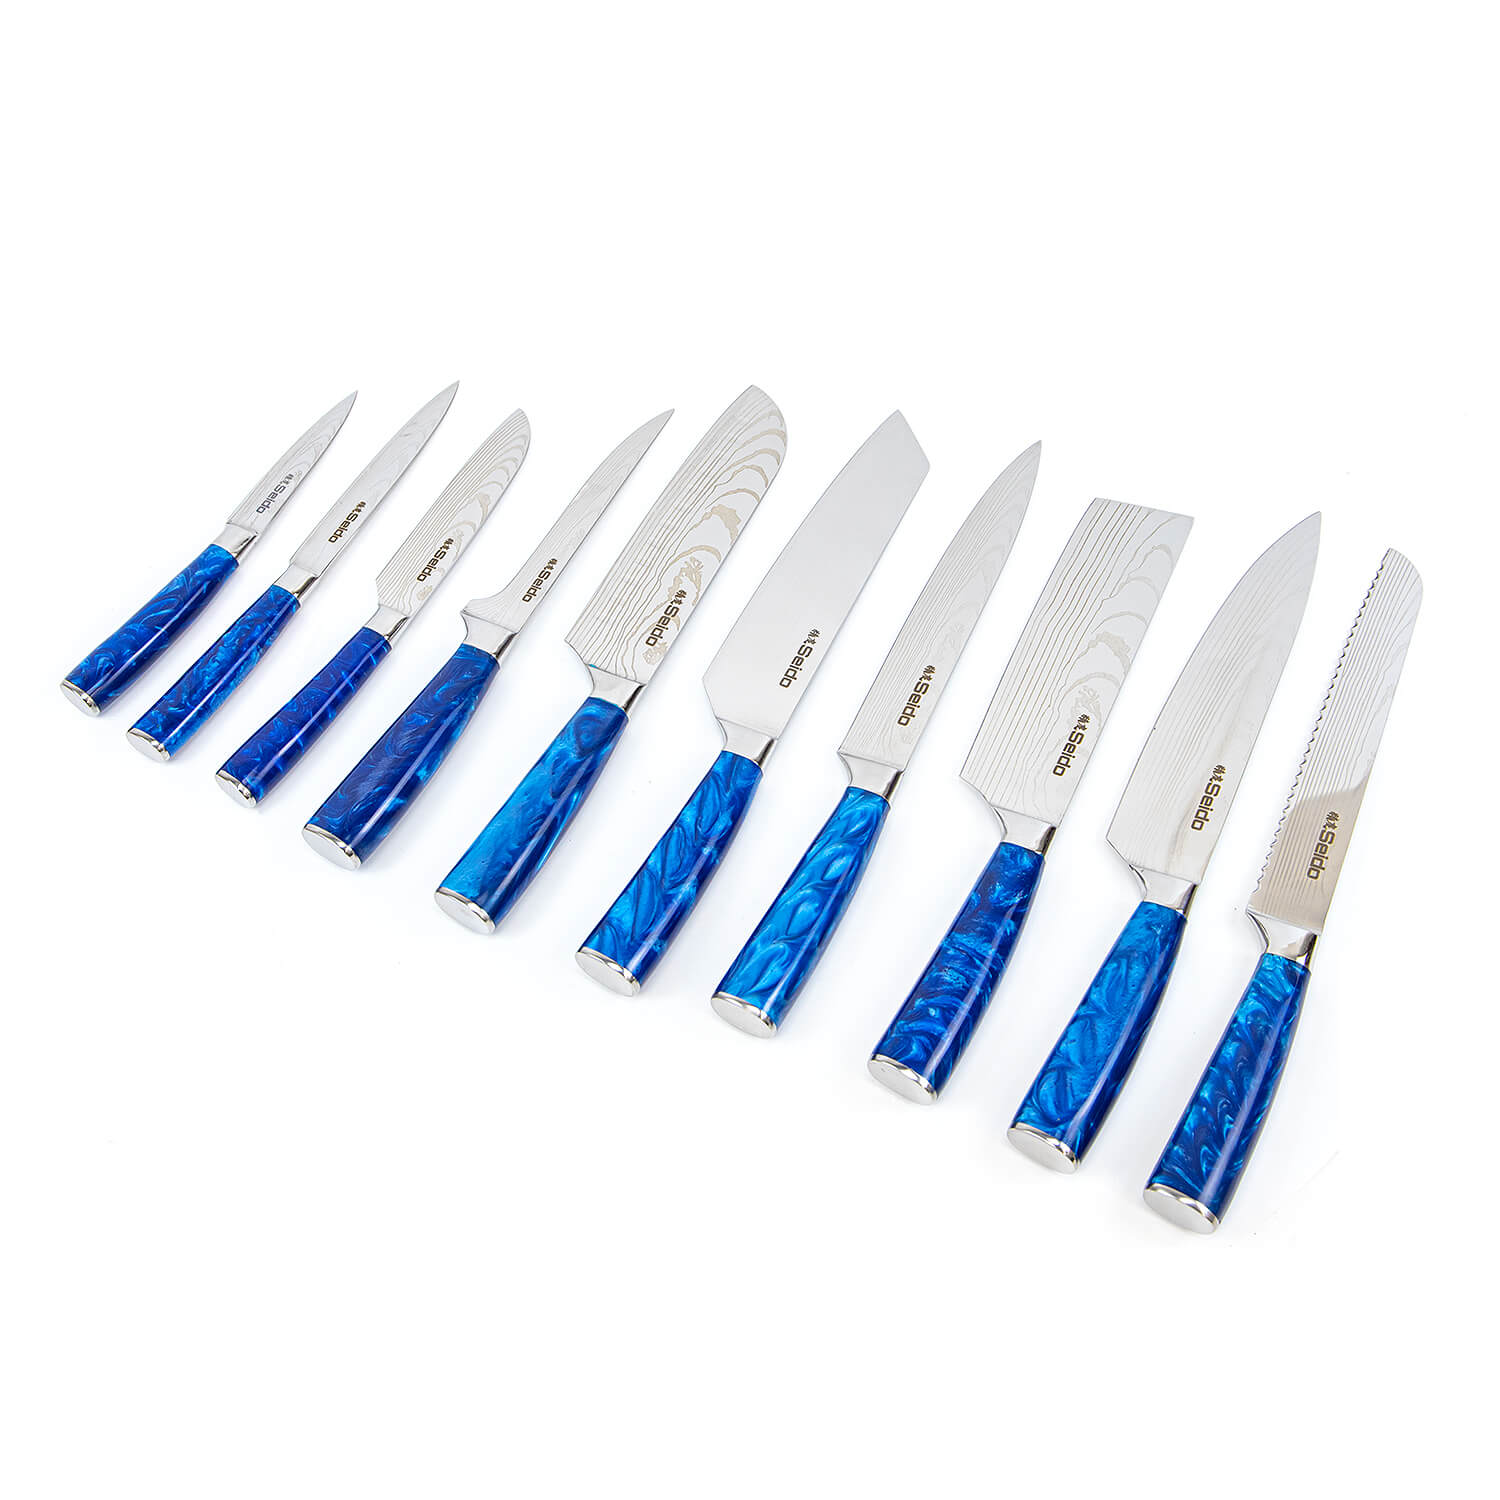 The Tengoku Chef Knife Set by Seido Knives features ten knives with sleek blue handles and shown on a white background.